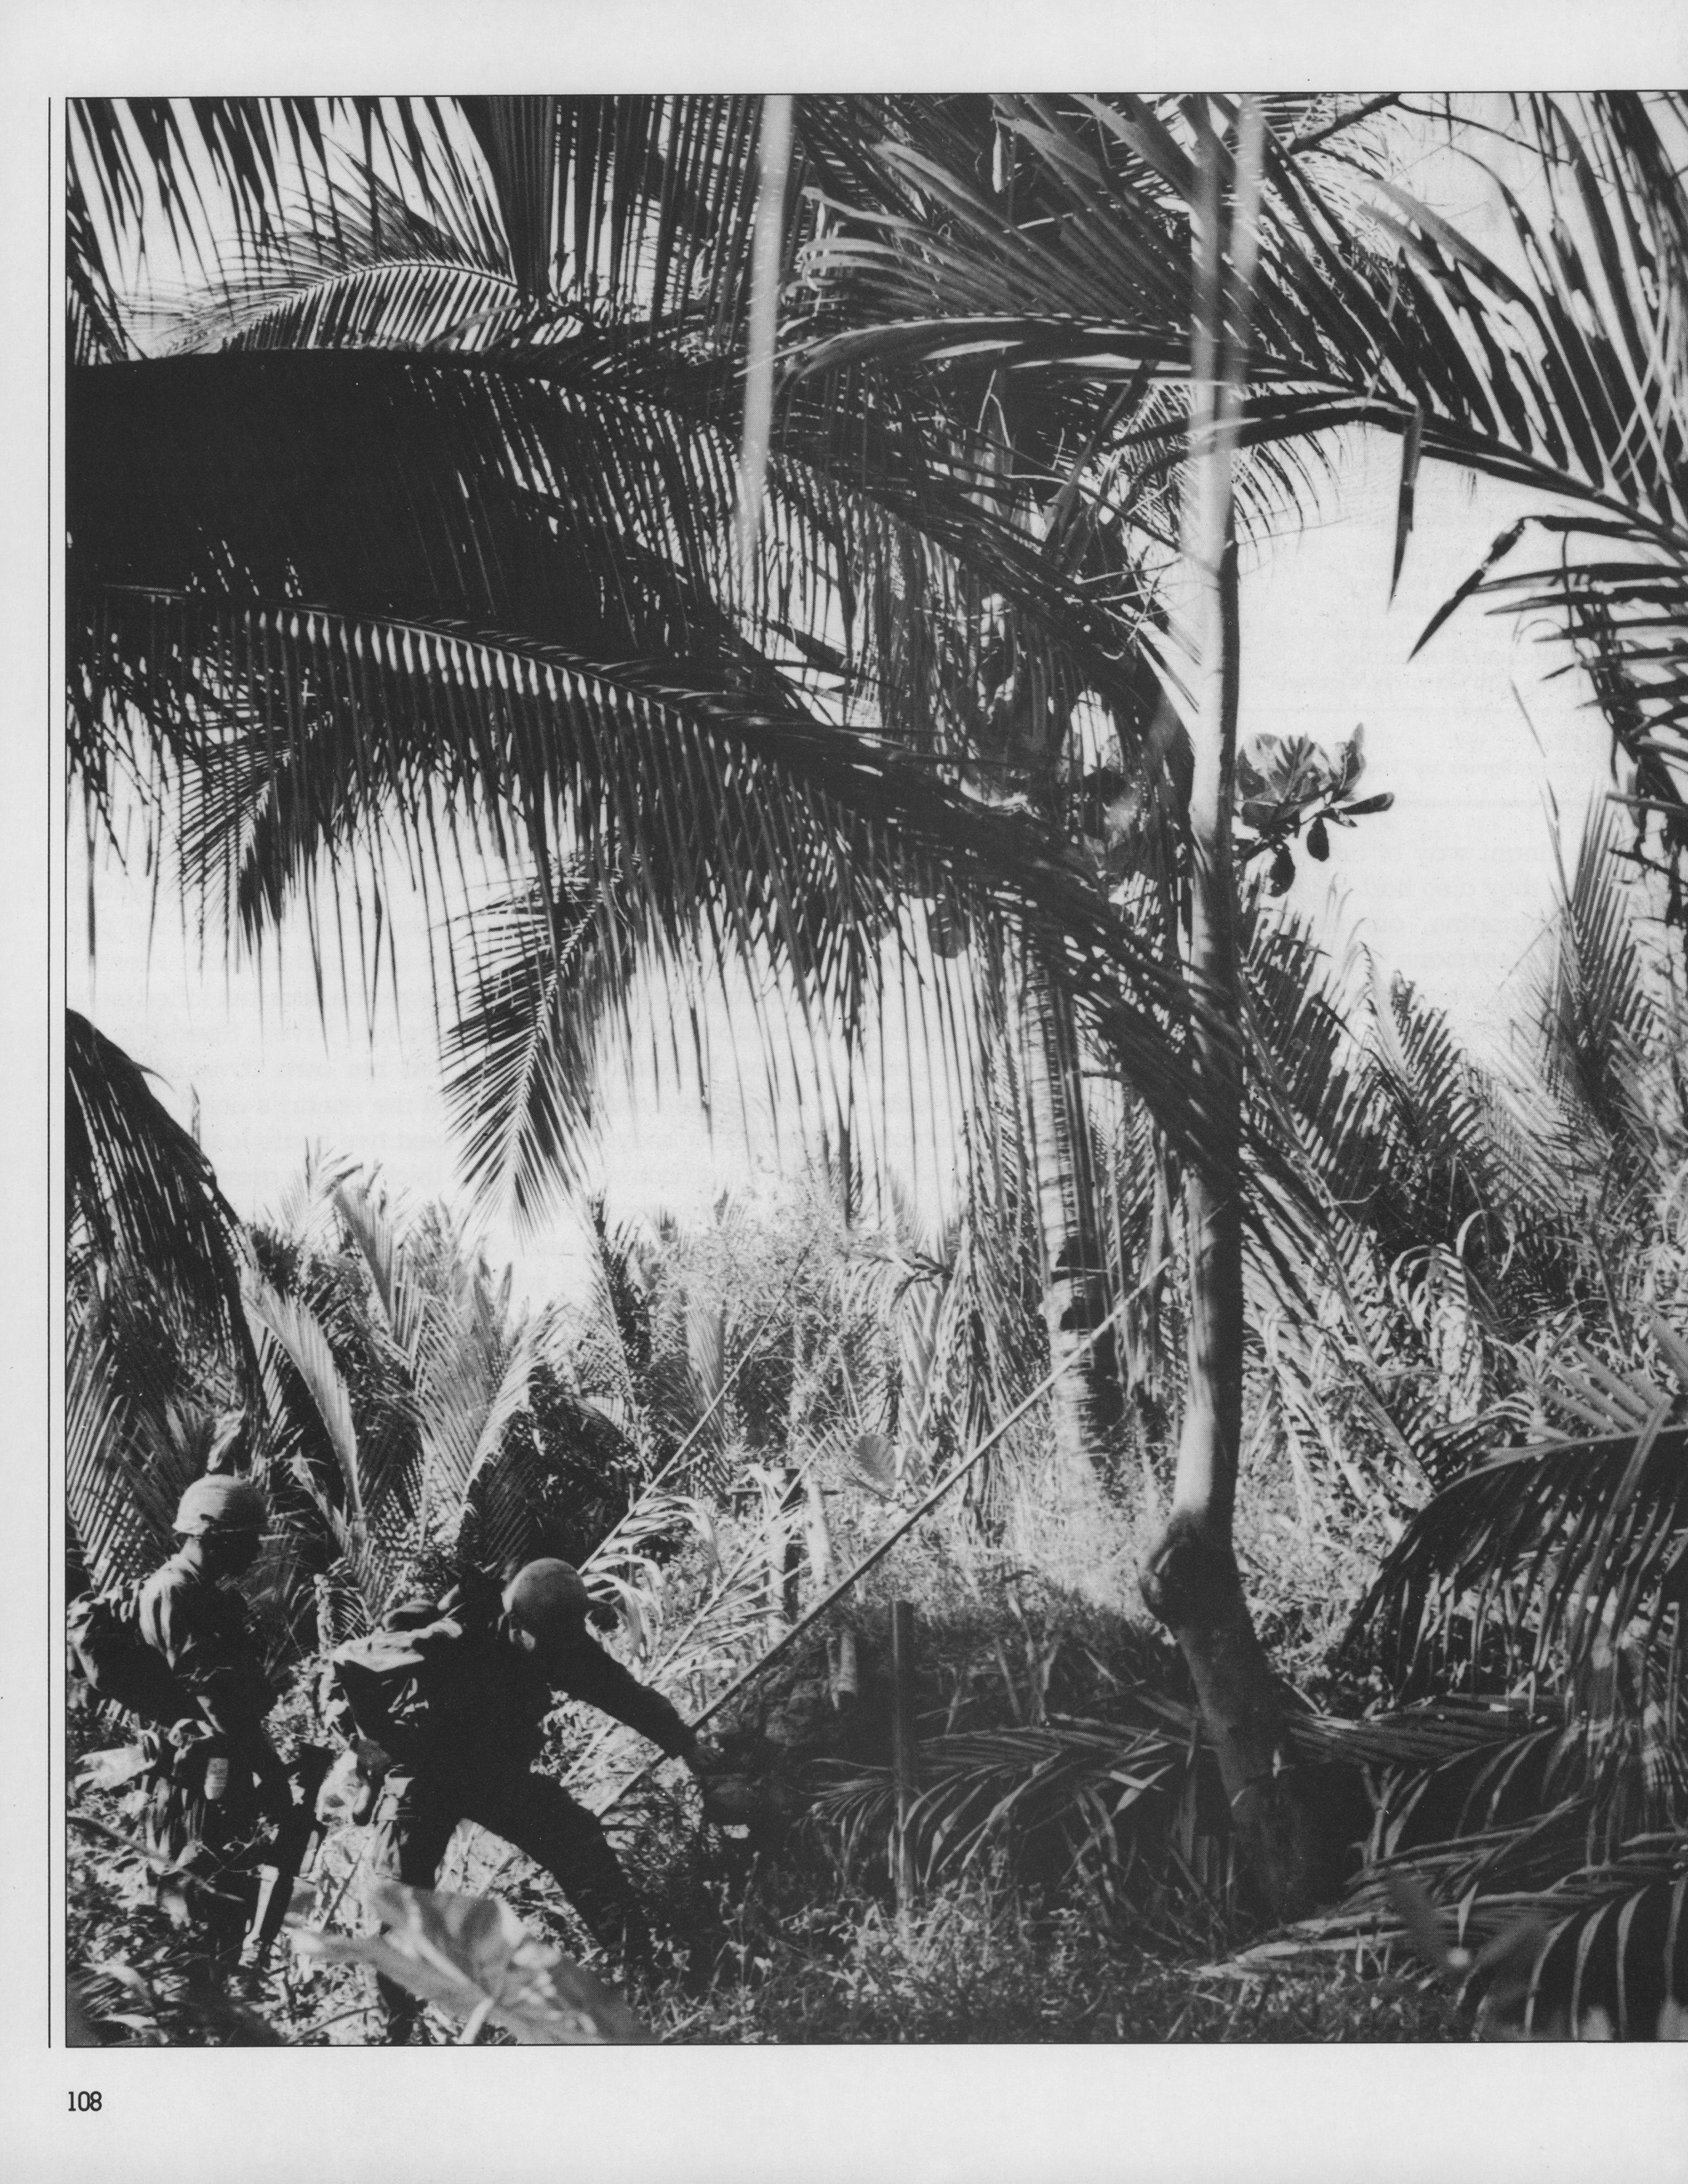  Full page view of  palm tree, page 108, volume 22 of The Vietnam Experience.  